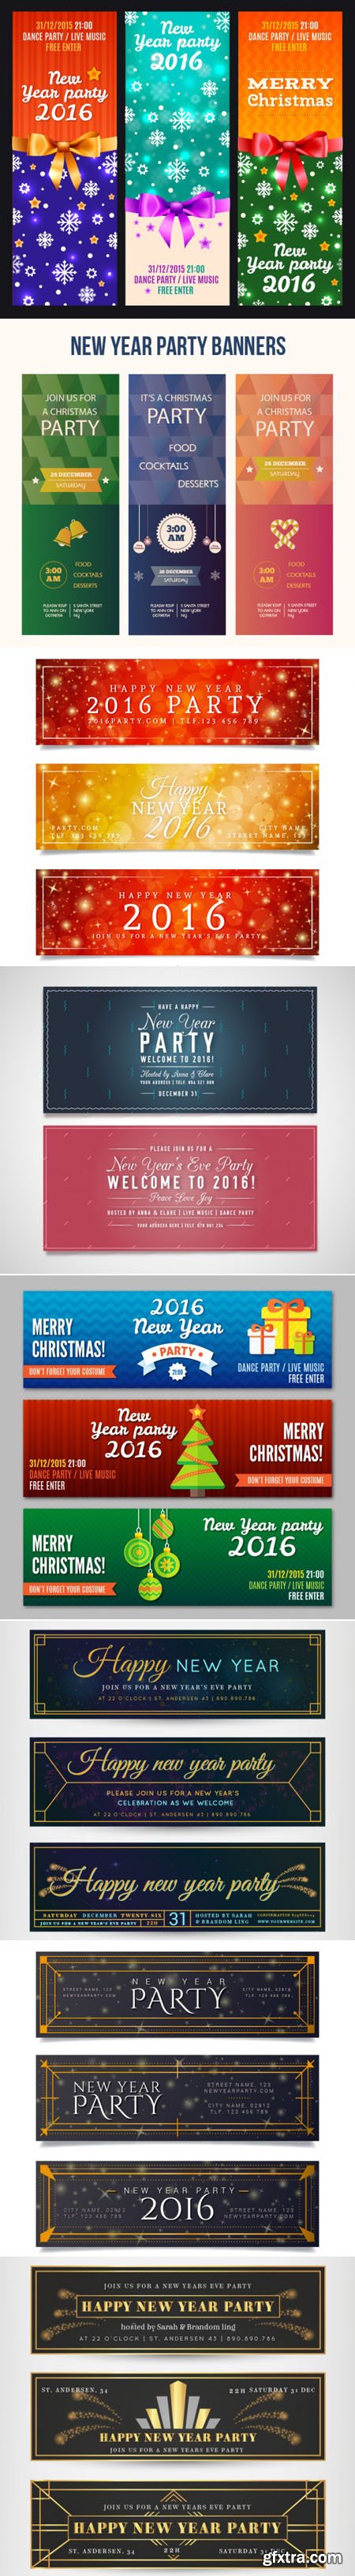 New Year 2016 Party Banners in Vector [Vol.2]